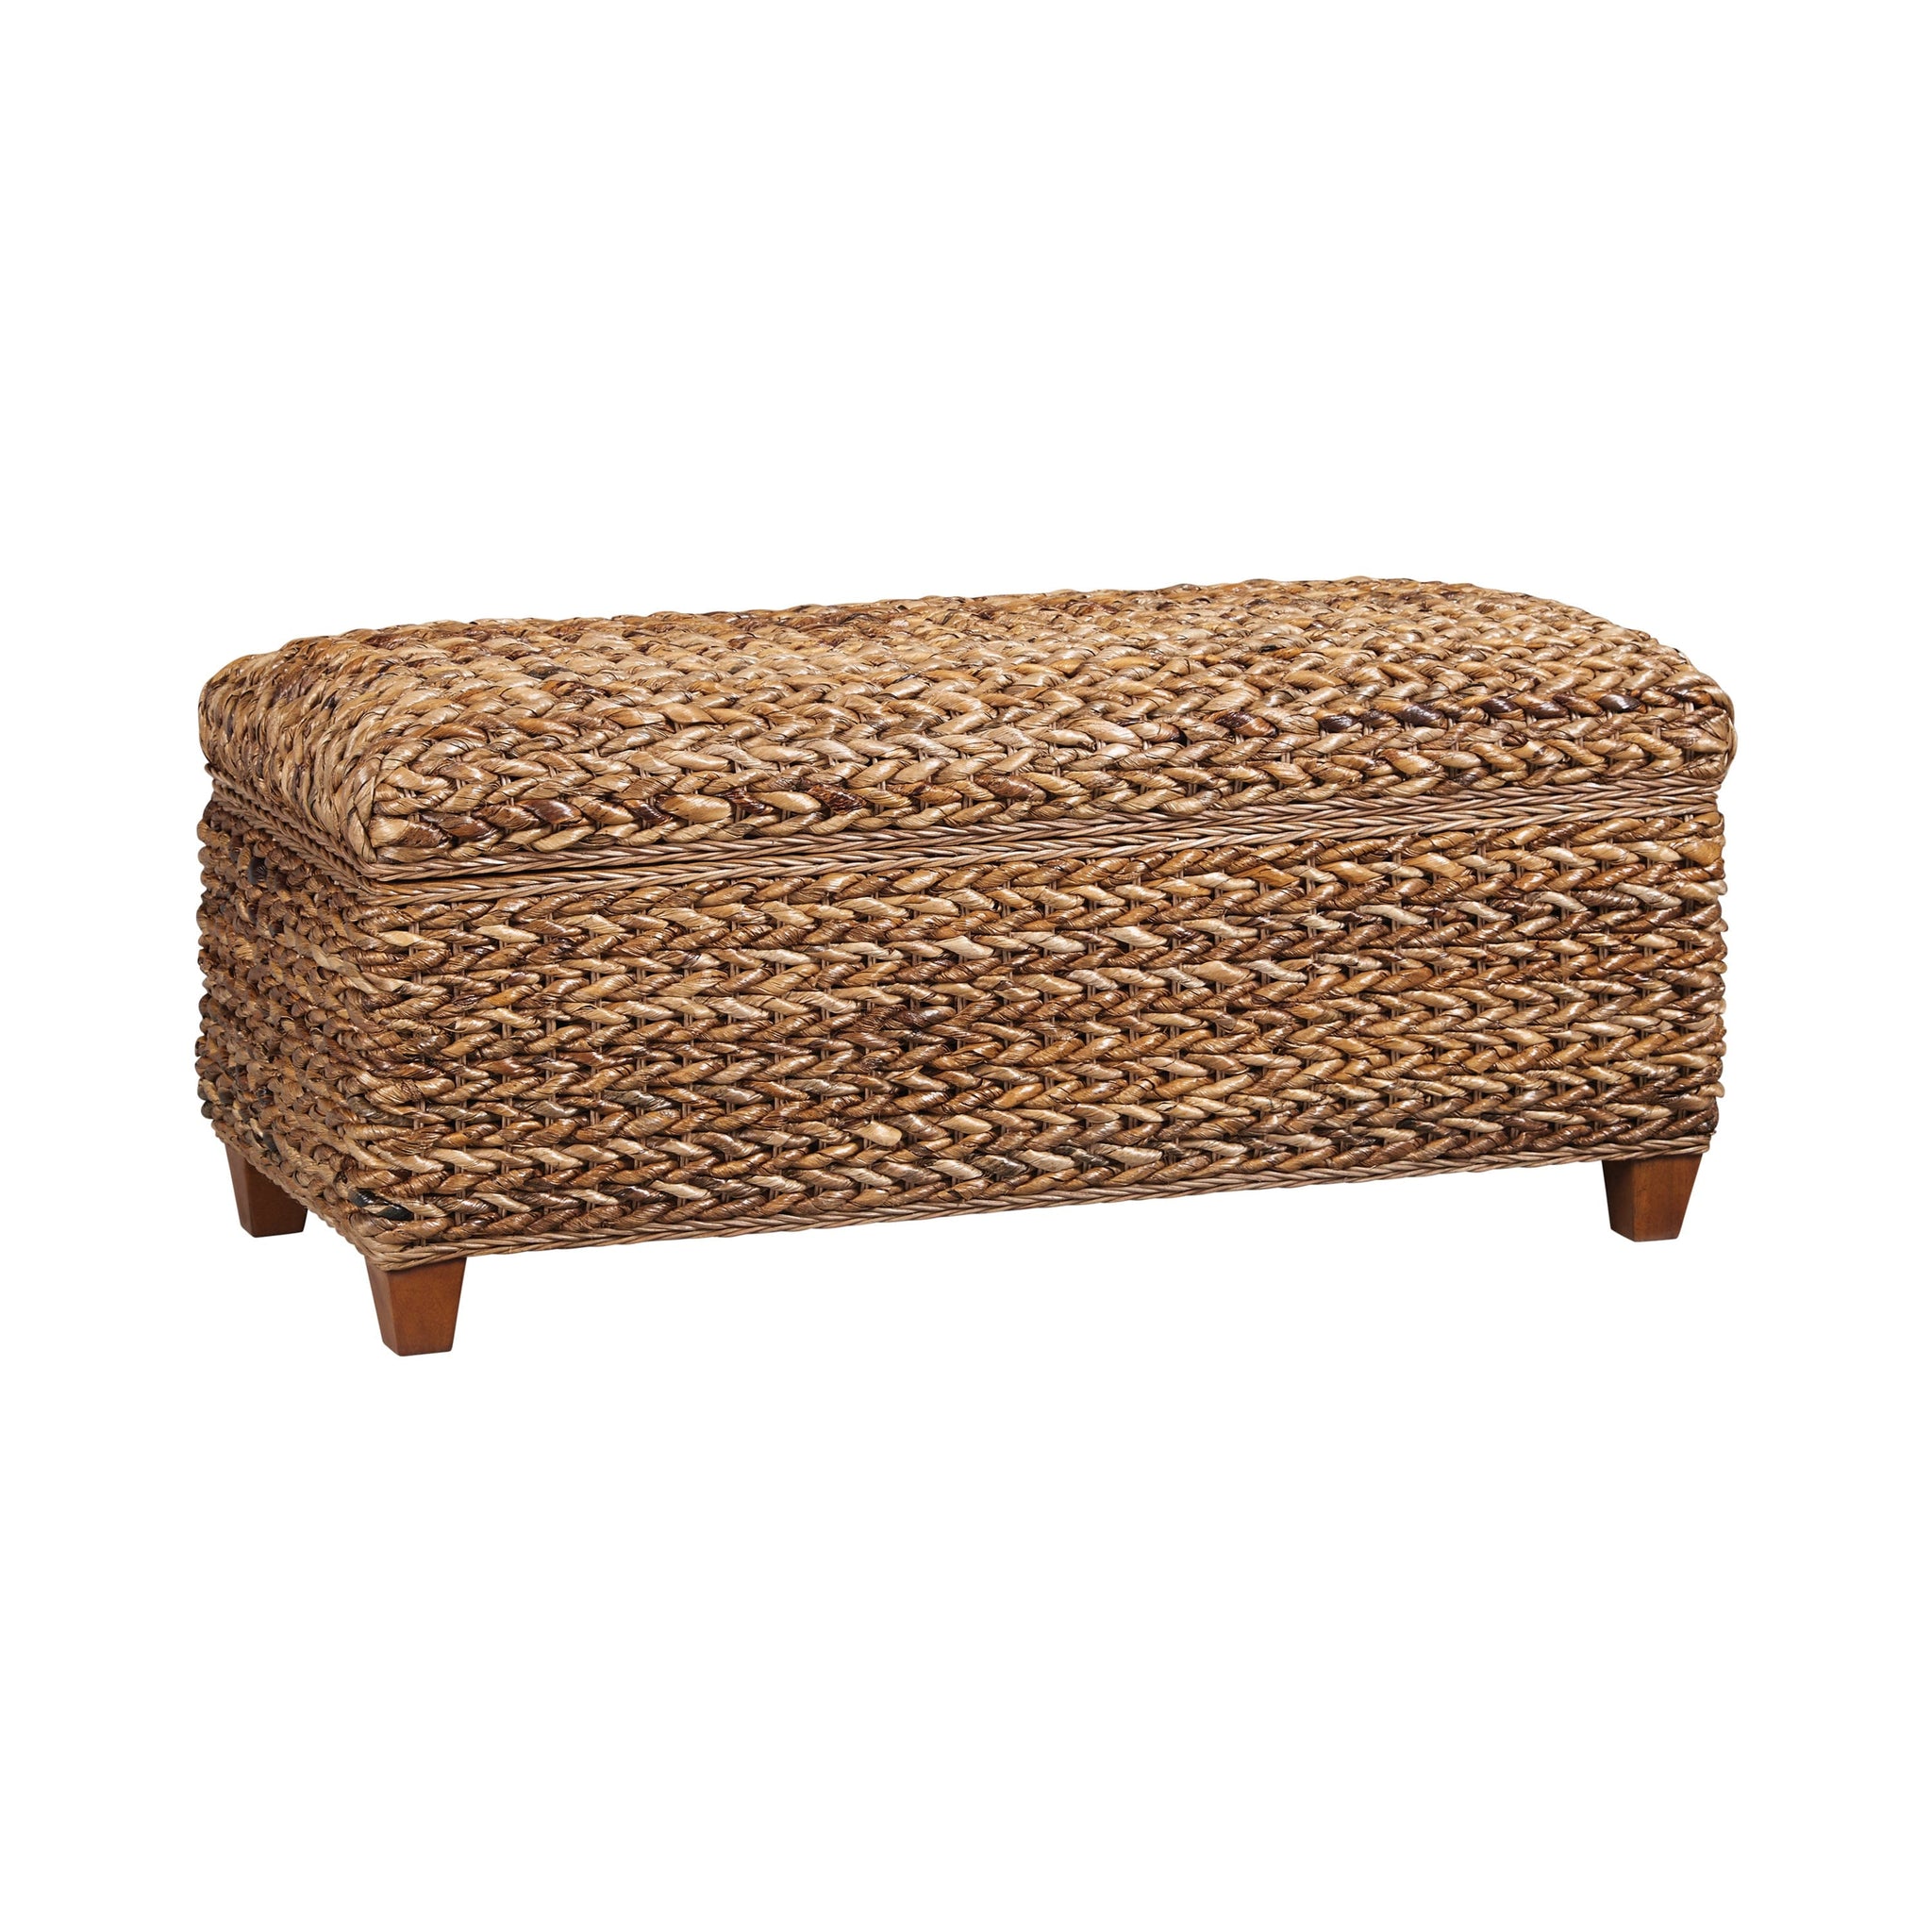 Laughton Hand-Woven Storage Trunk Amber - 500215